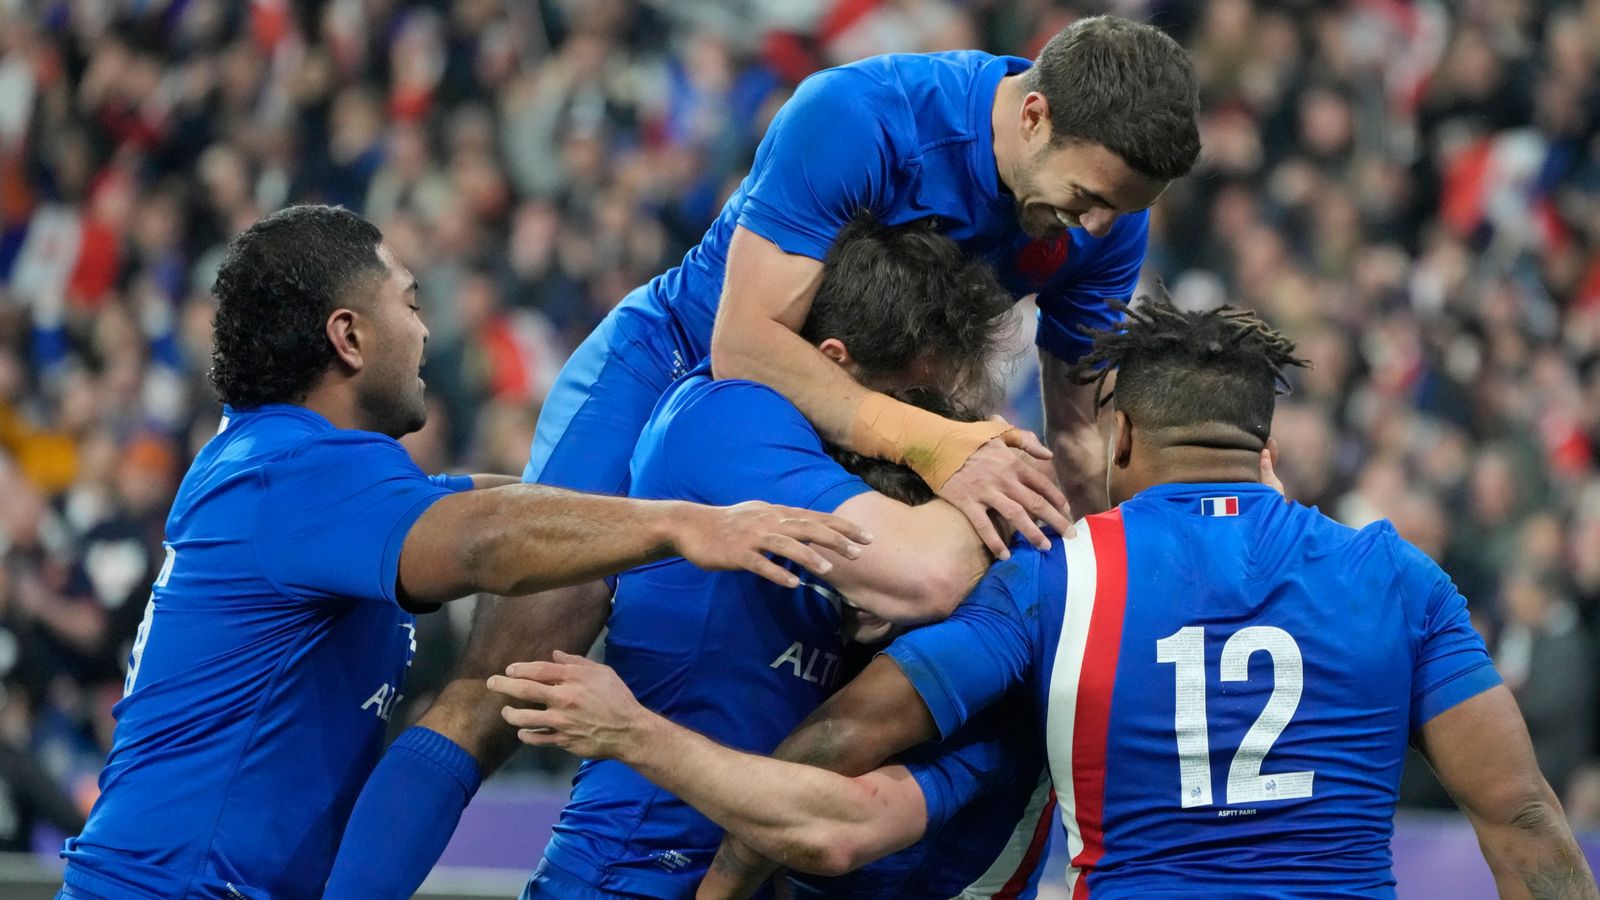 Six Nations: France crowned champions with 25-13 win over England to complete Grand Slam